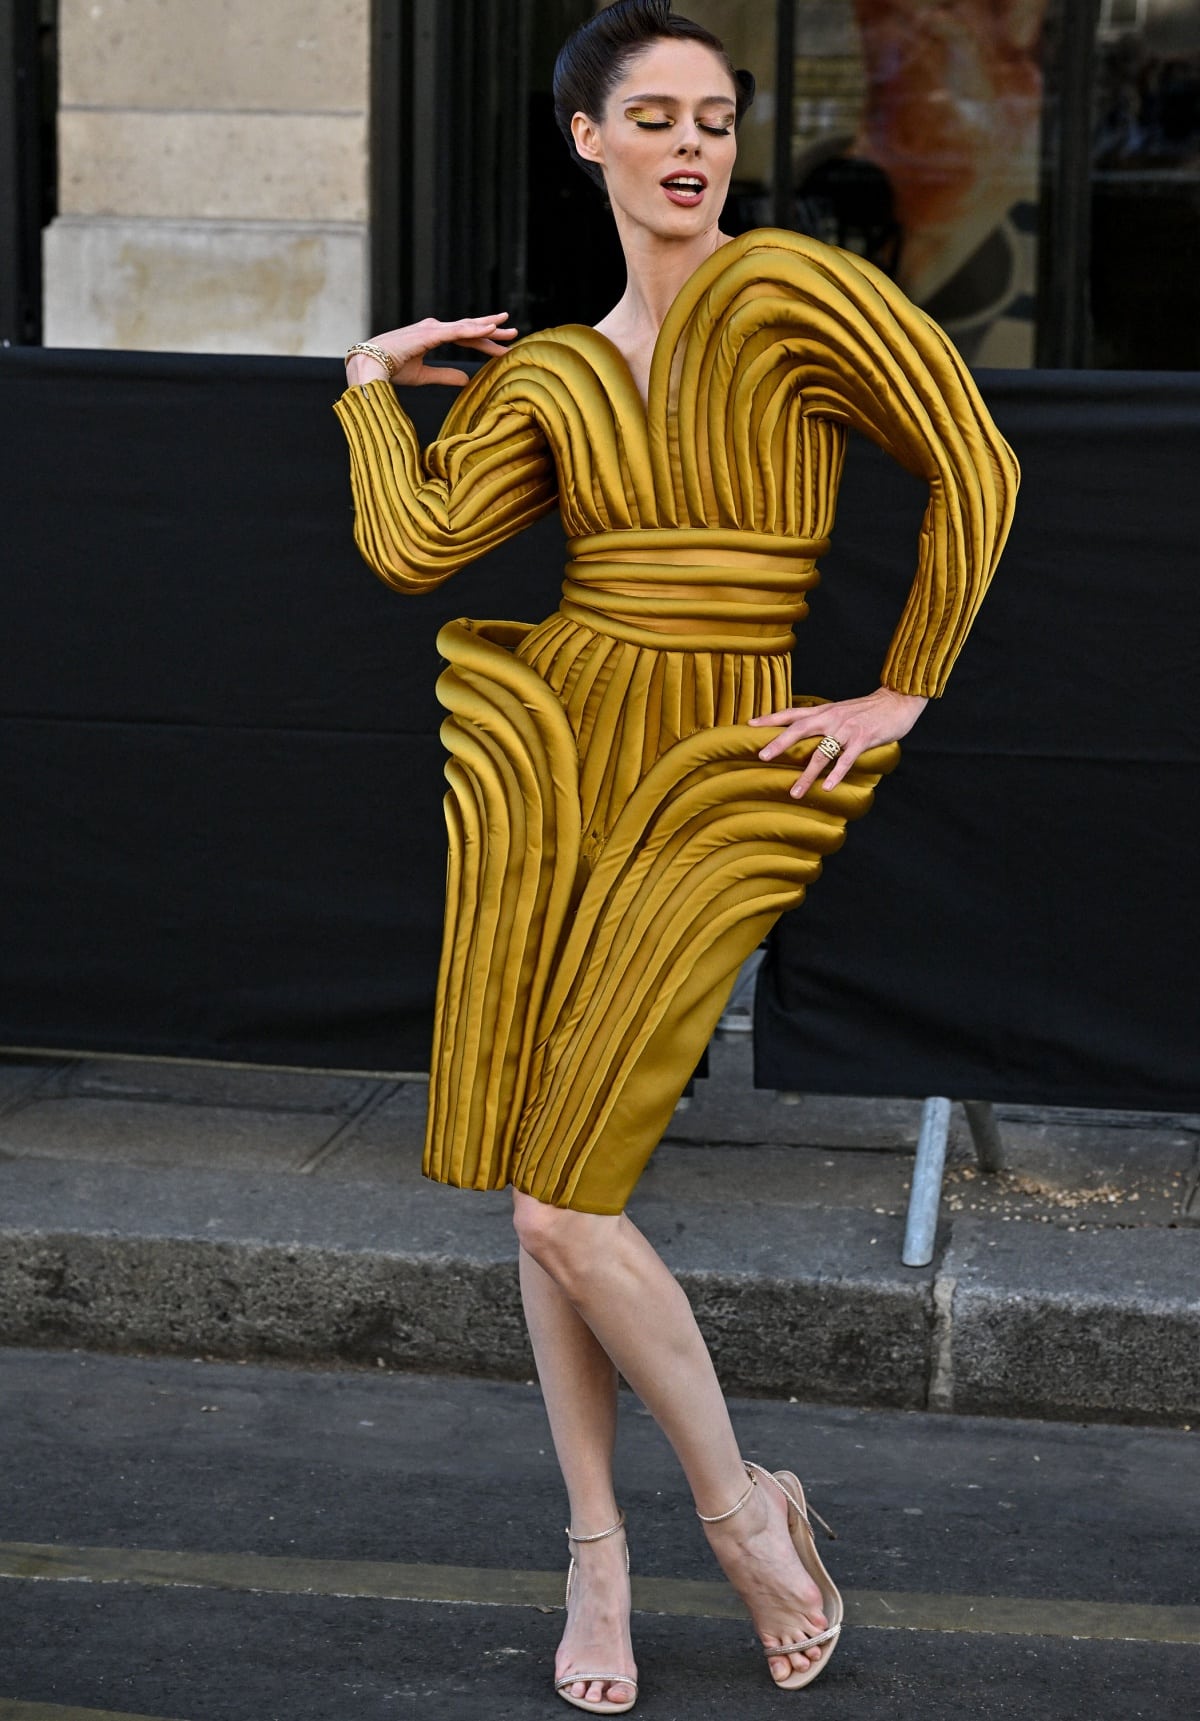 Coco Rocha posing in a gold archival piece for the Jean Paul Gaultier x Olivier Rousteing show